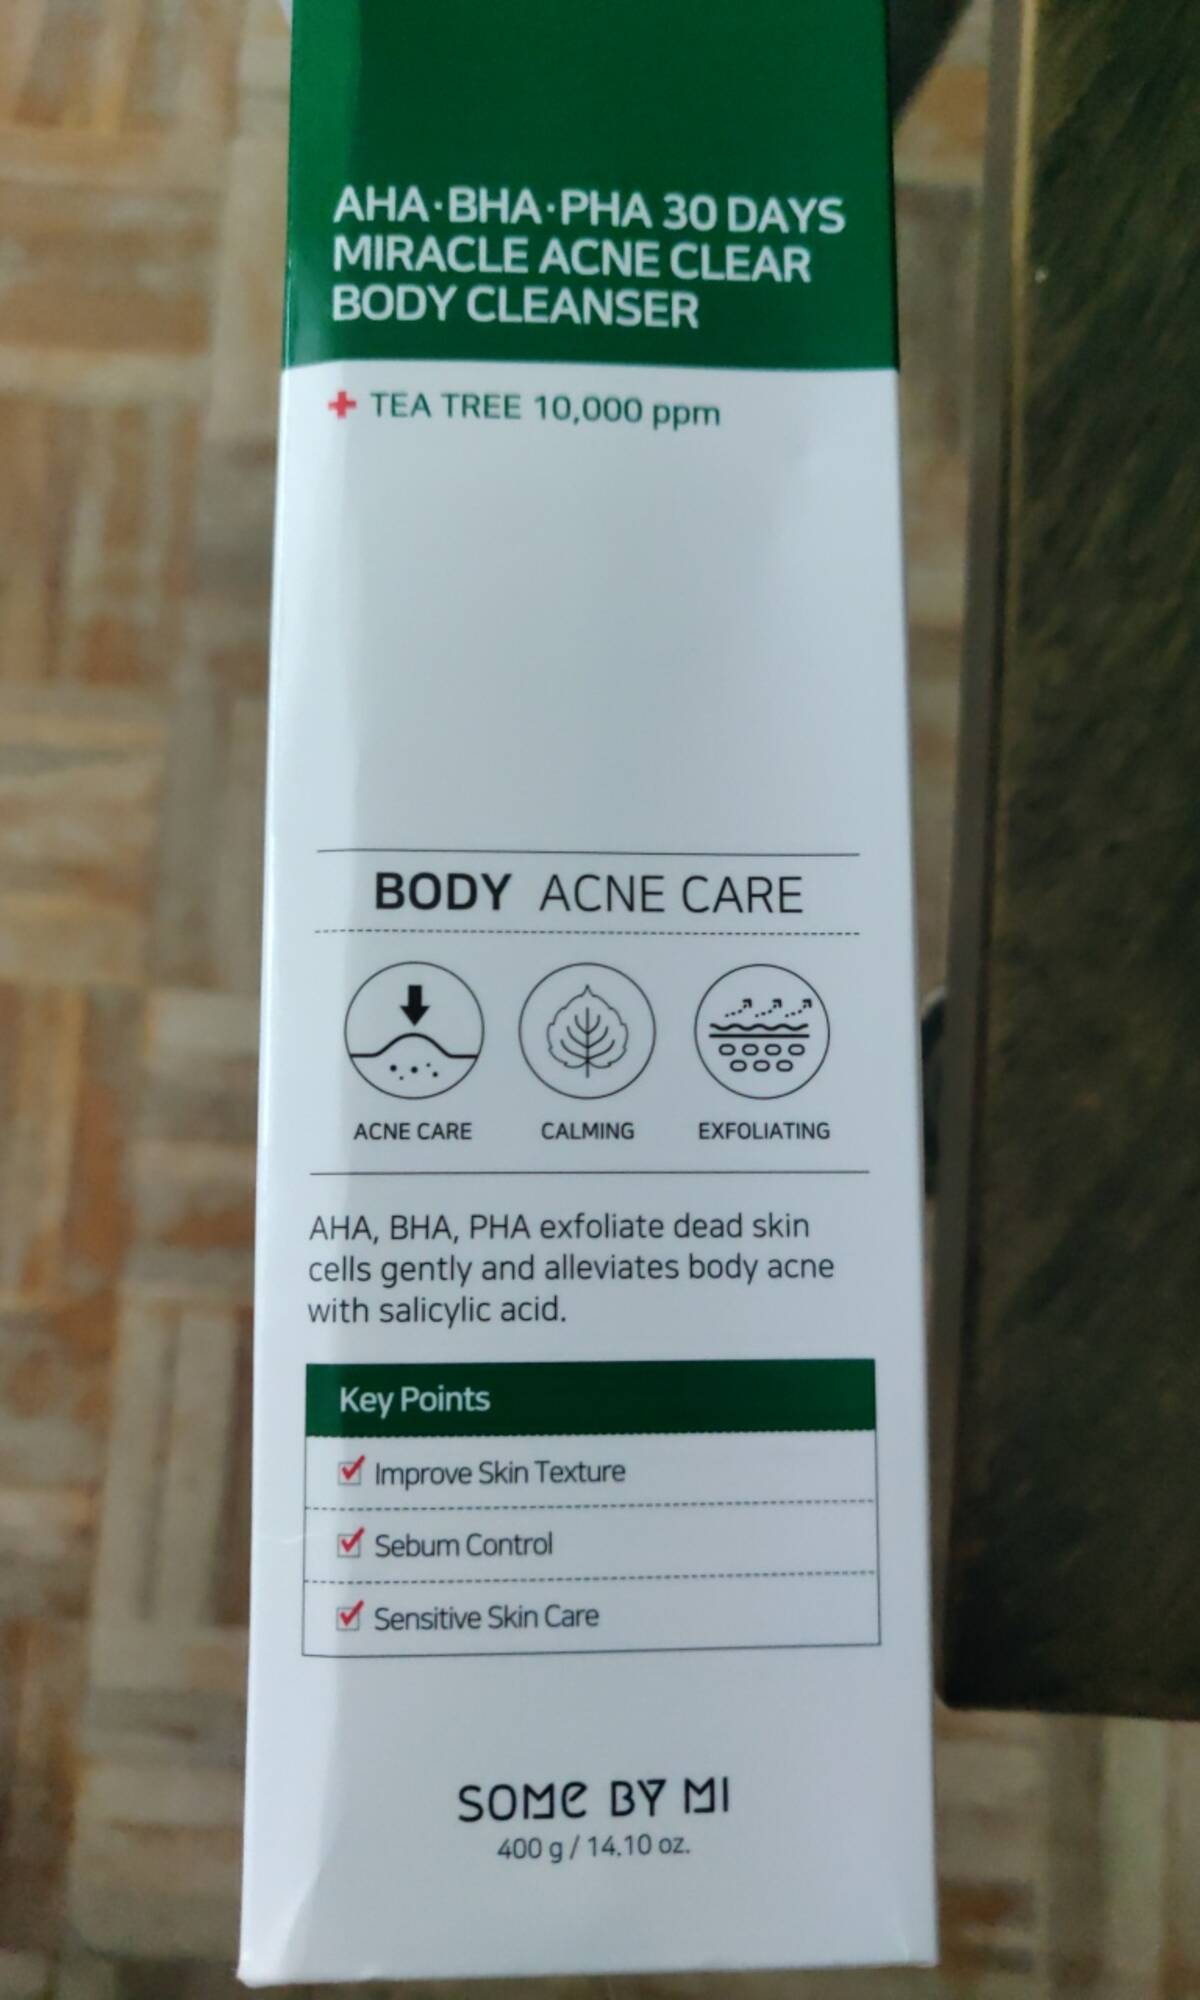 SOME BY MI - Miracle acné clear body cleanser